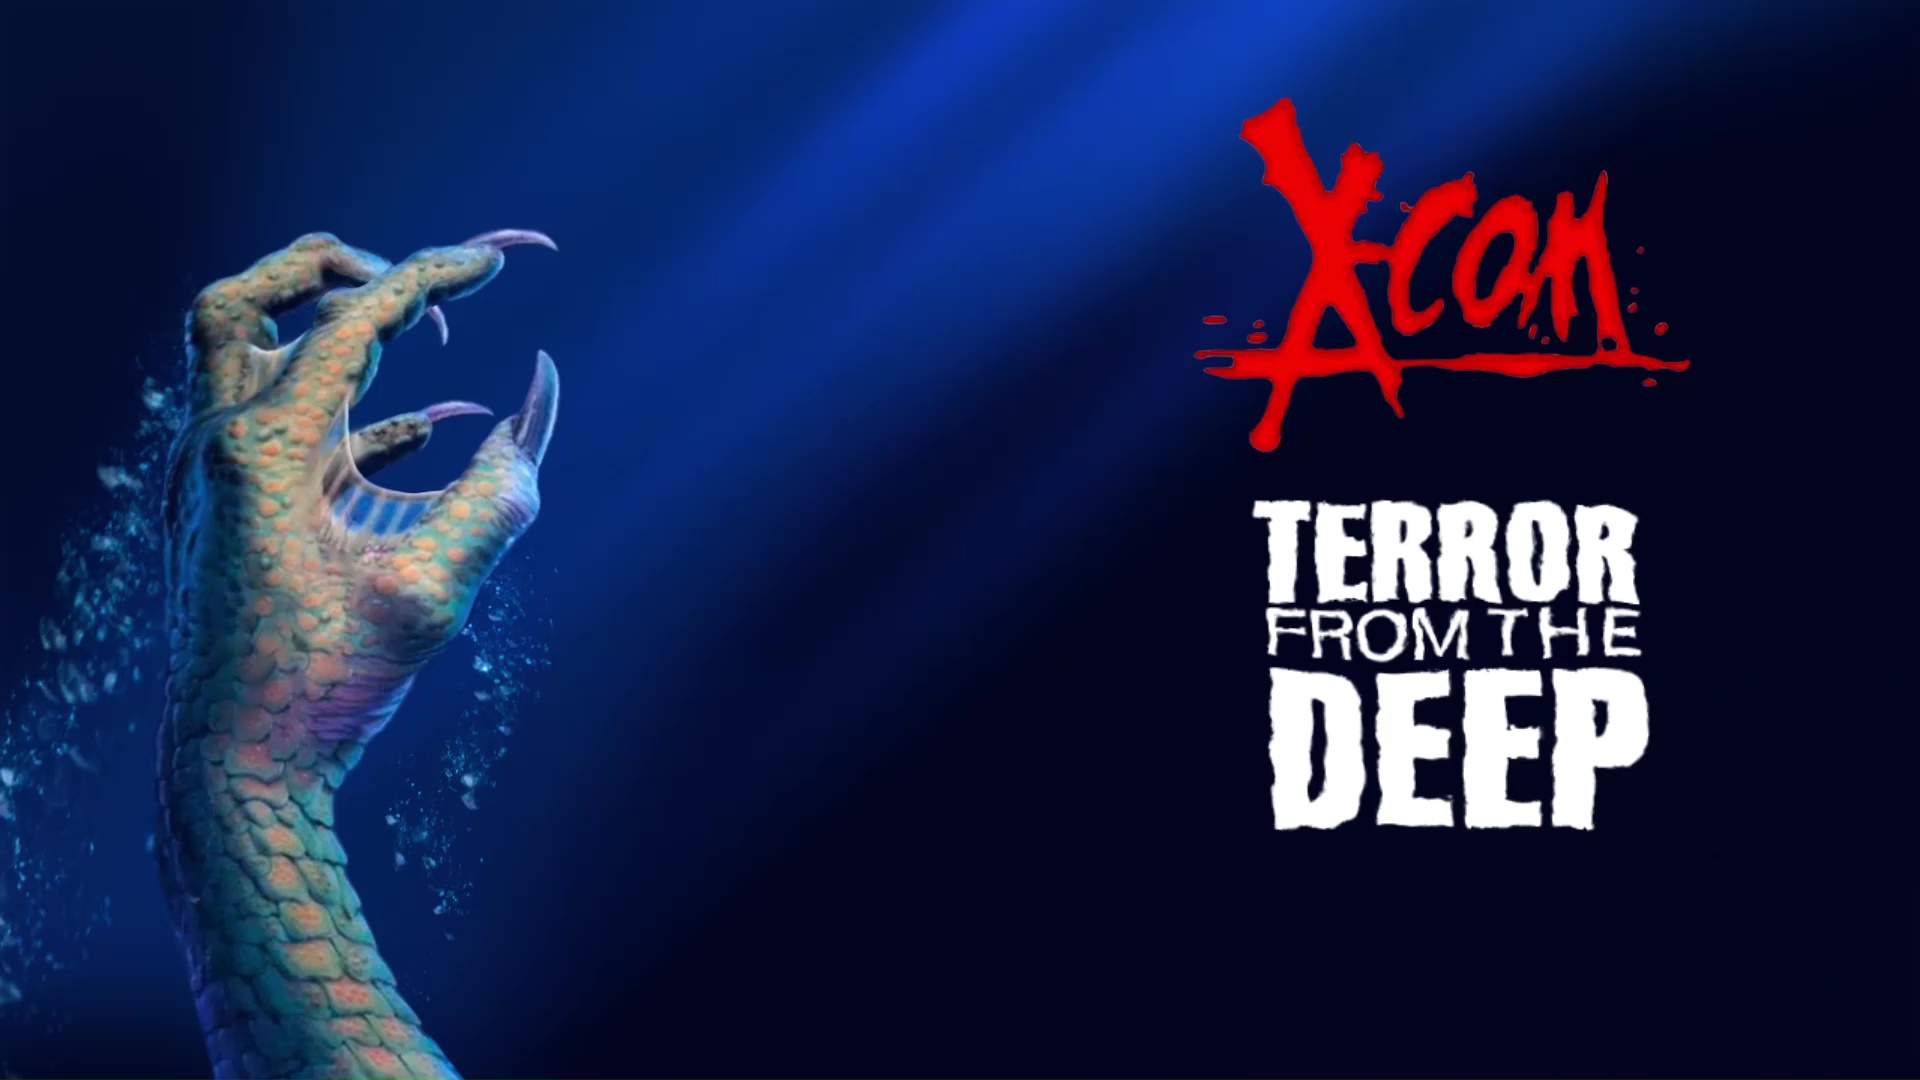 Com terror from the deep. UFO Terror from the Deep. XCOM Terror from the Deep. X-com: Terror from the Deep обложка. Terror from the Deep монстры.